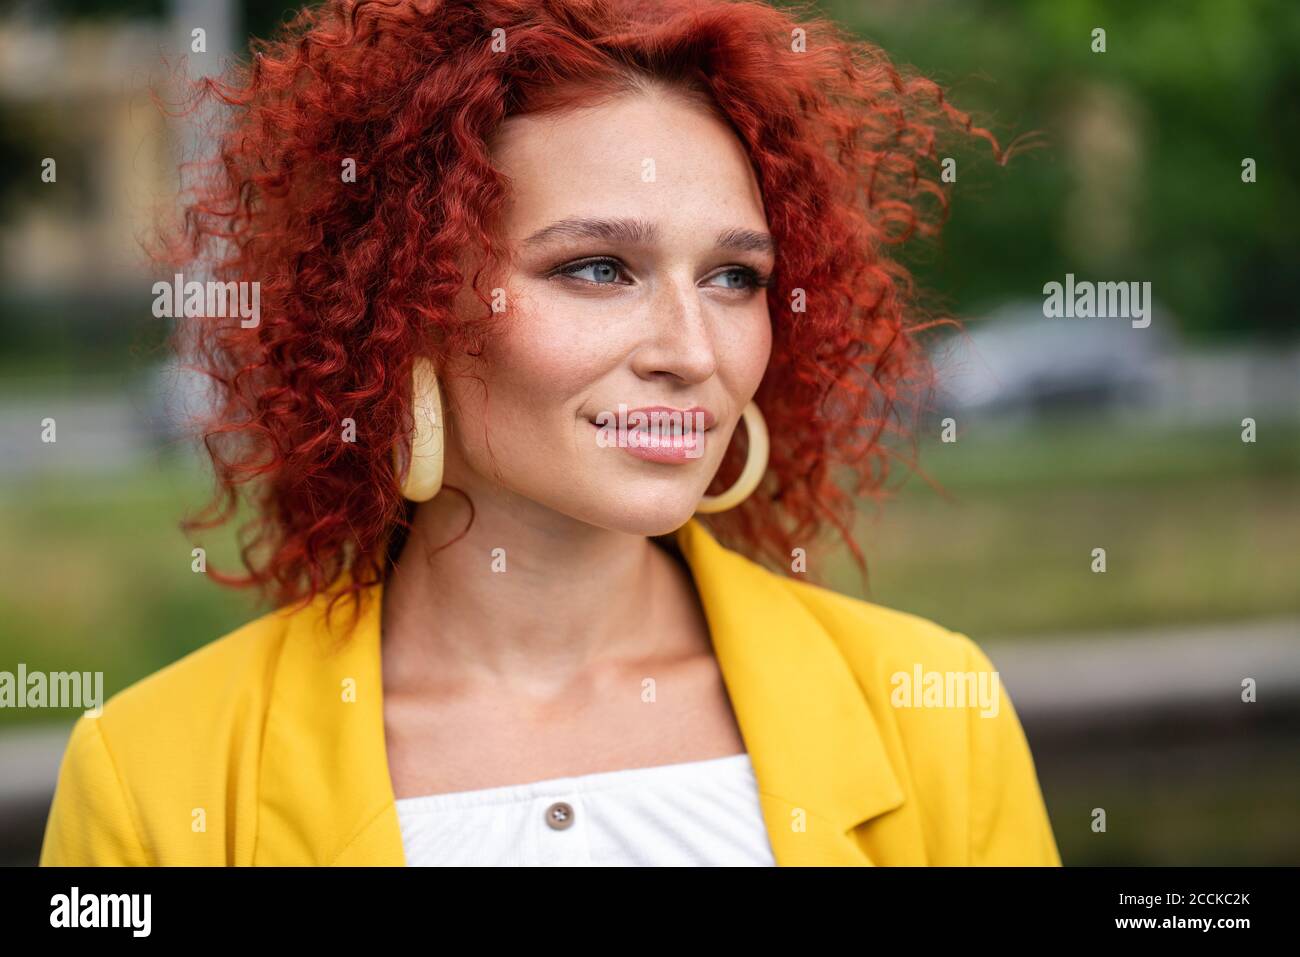 Beatiful woman with red curly hair, portrait Stock Photo